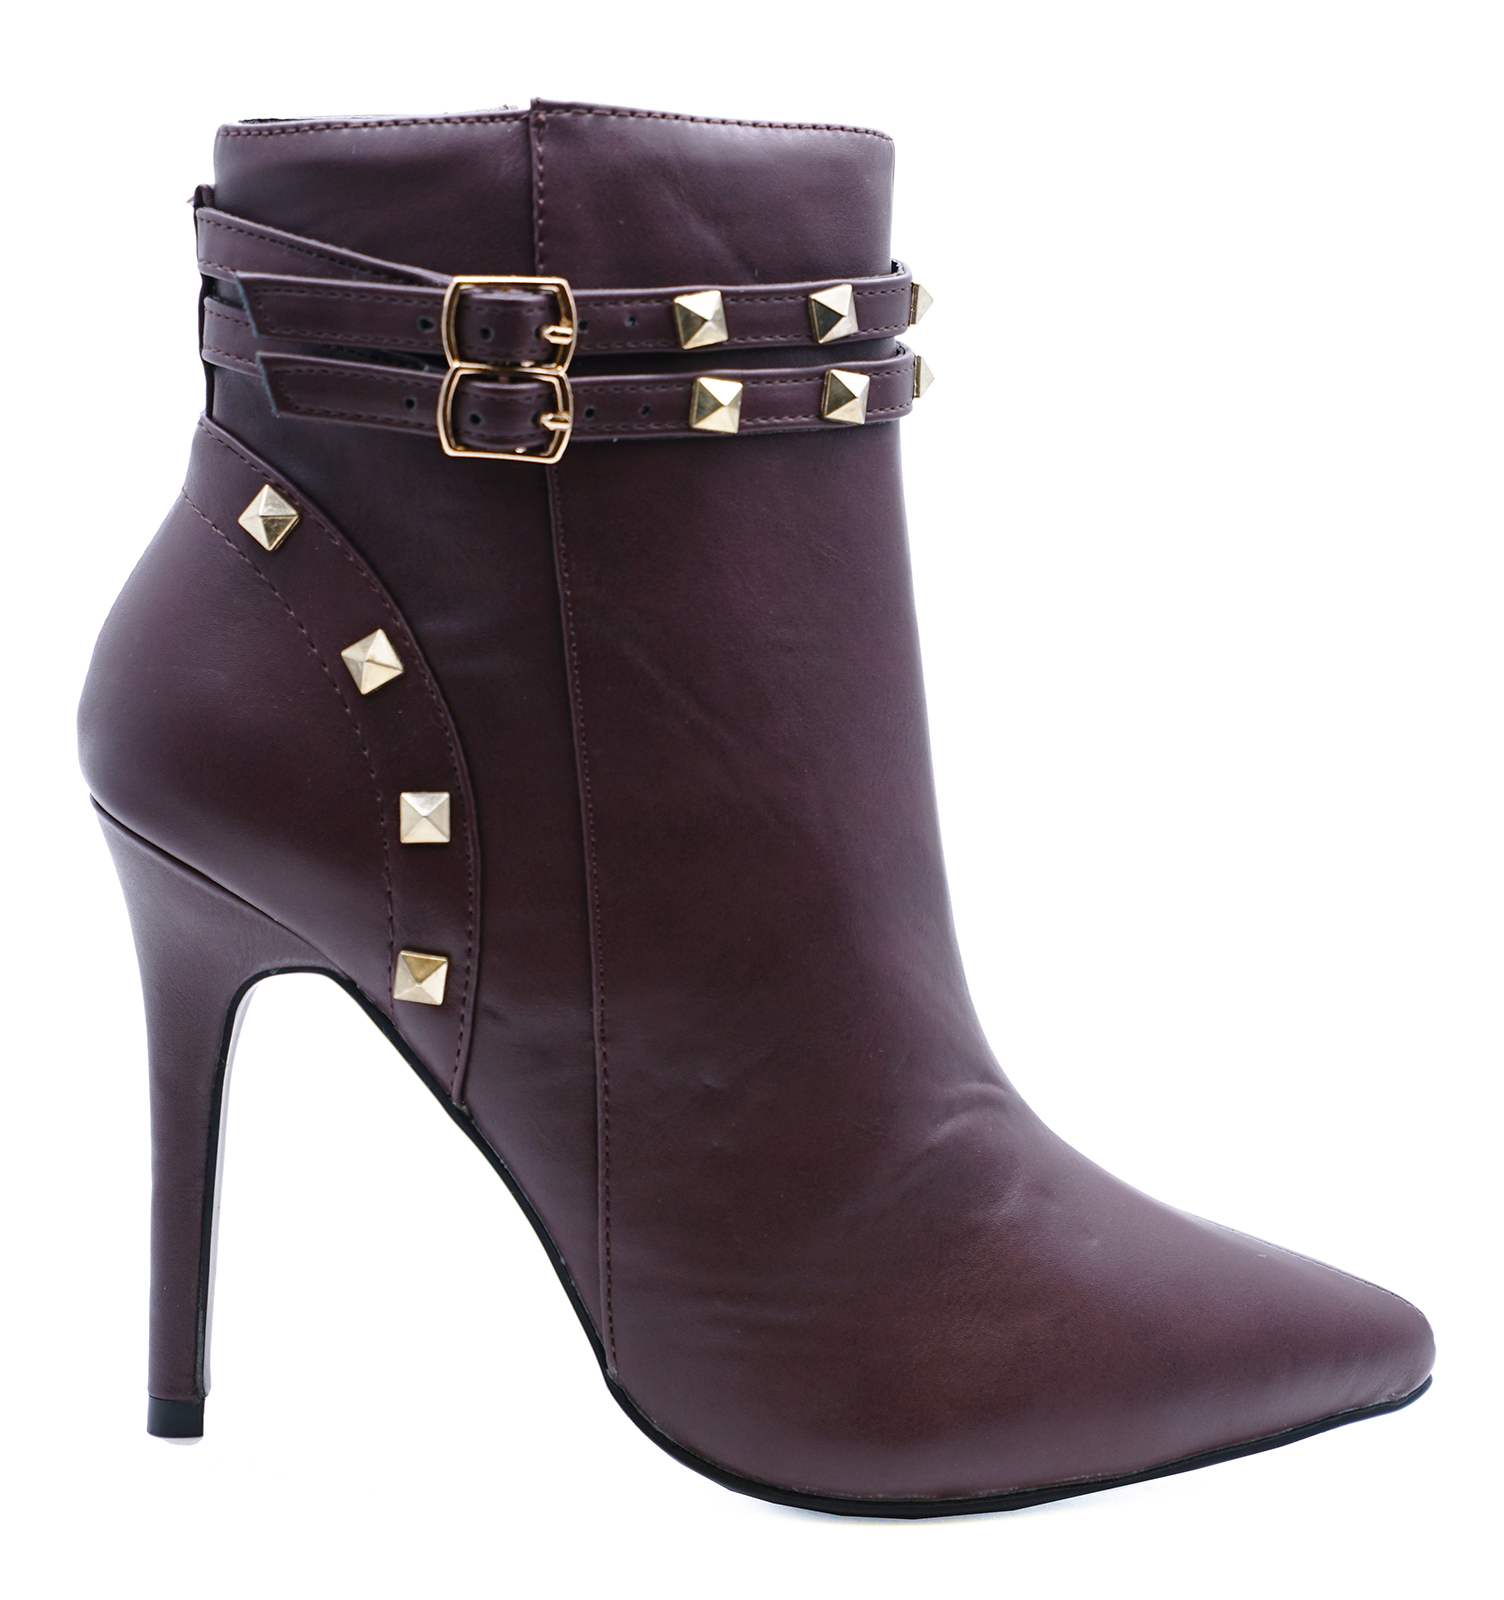 LADIES BURGUNDY STUD ZIP-UP STILETTO ROCK-CHICK ANKLE CALF BOOTS SHOES ...